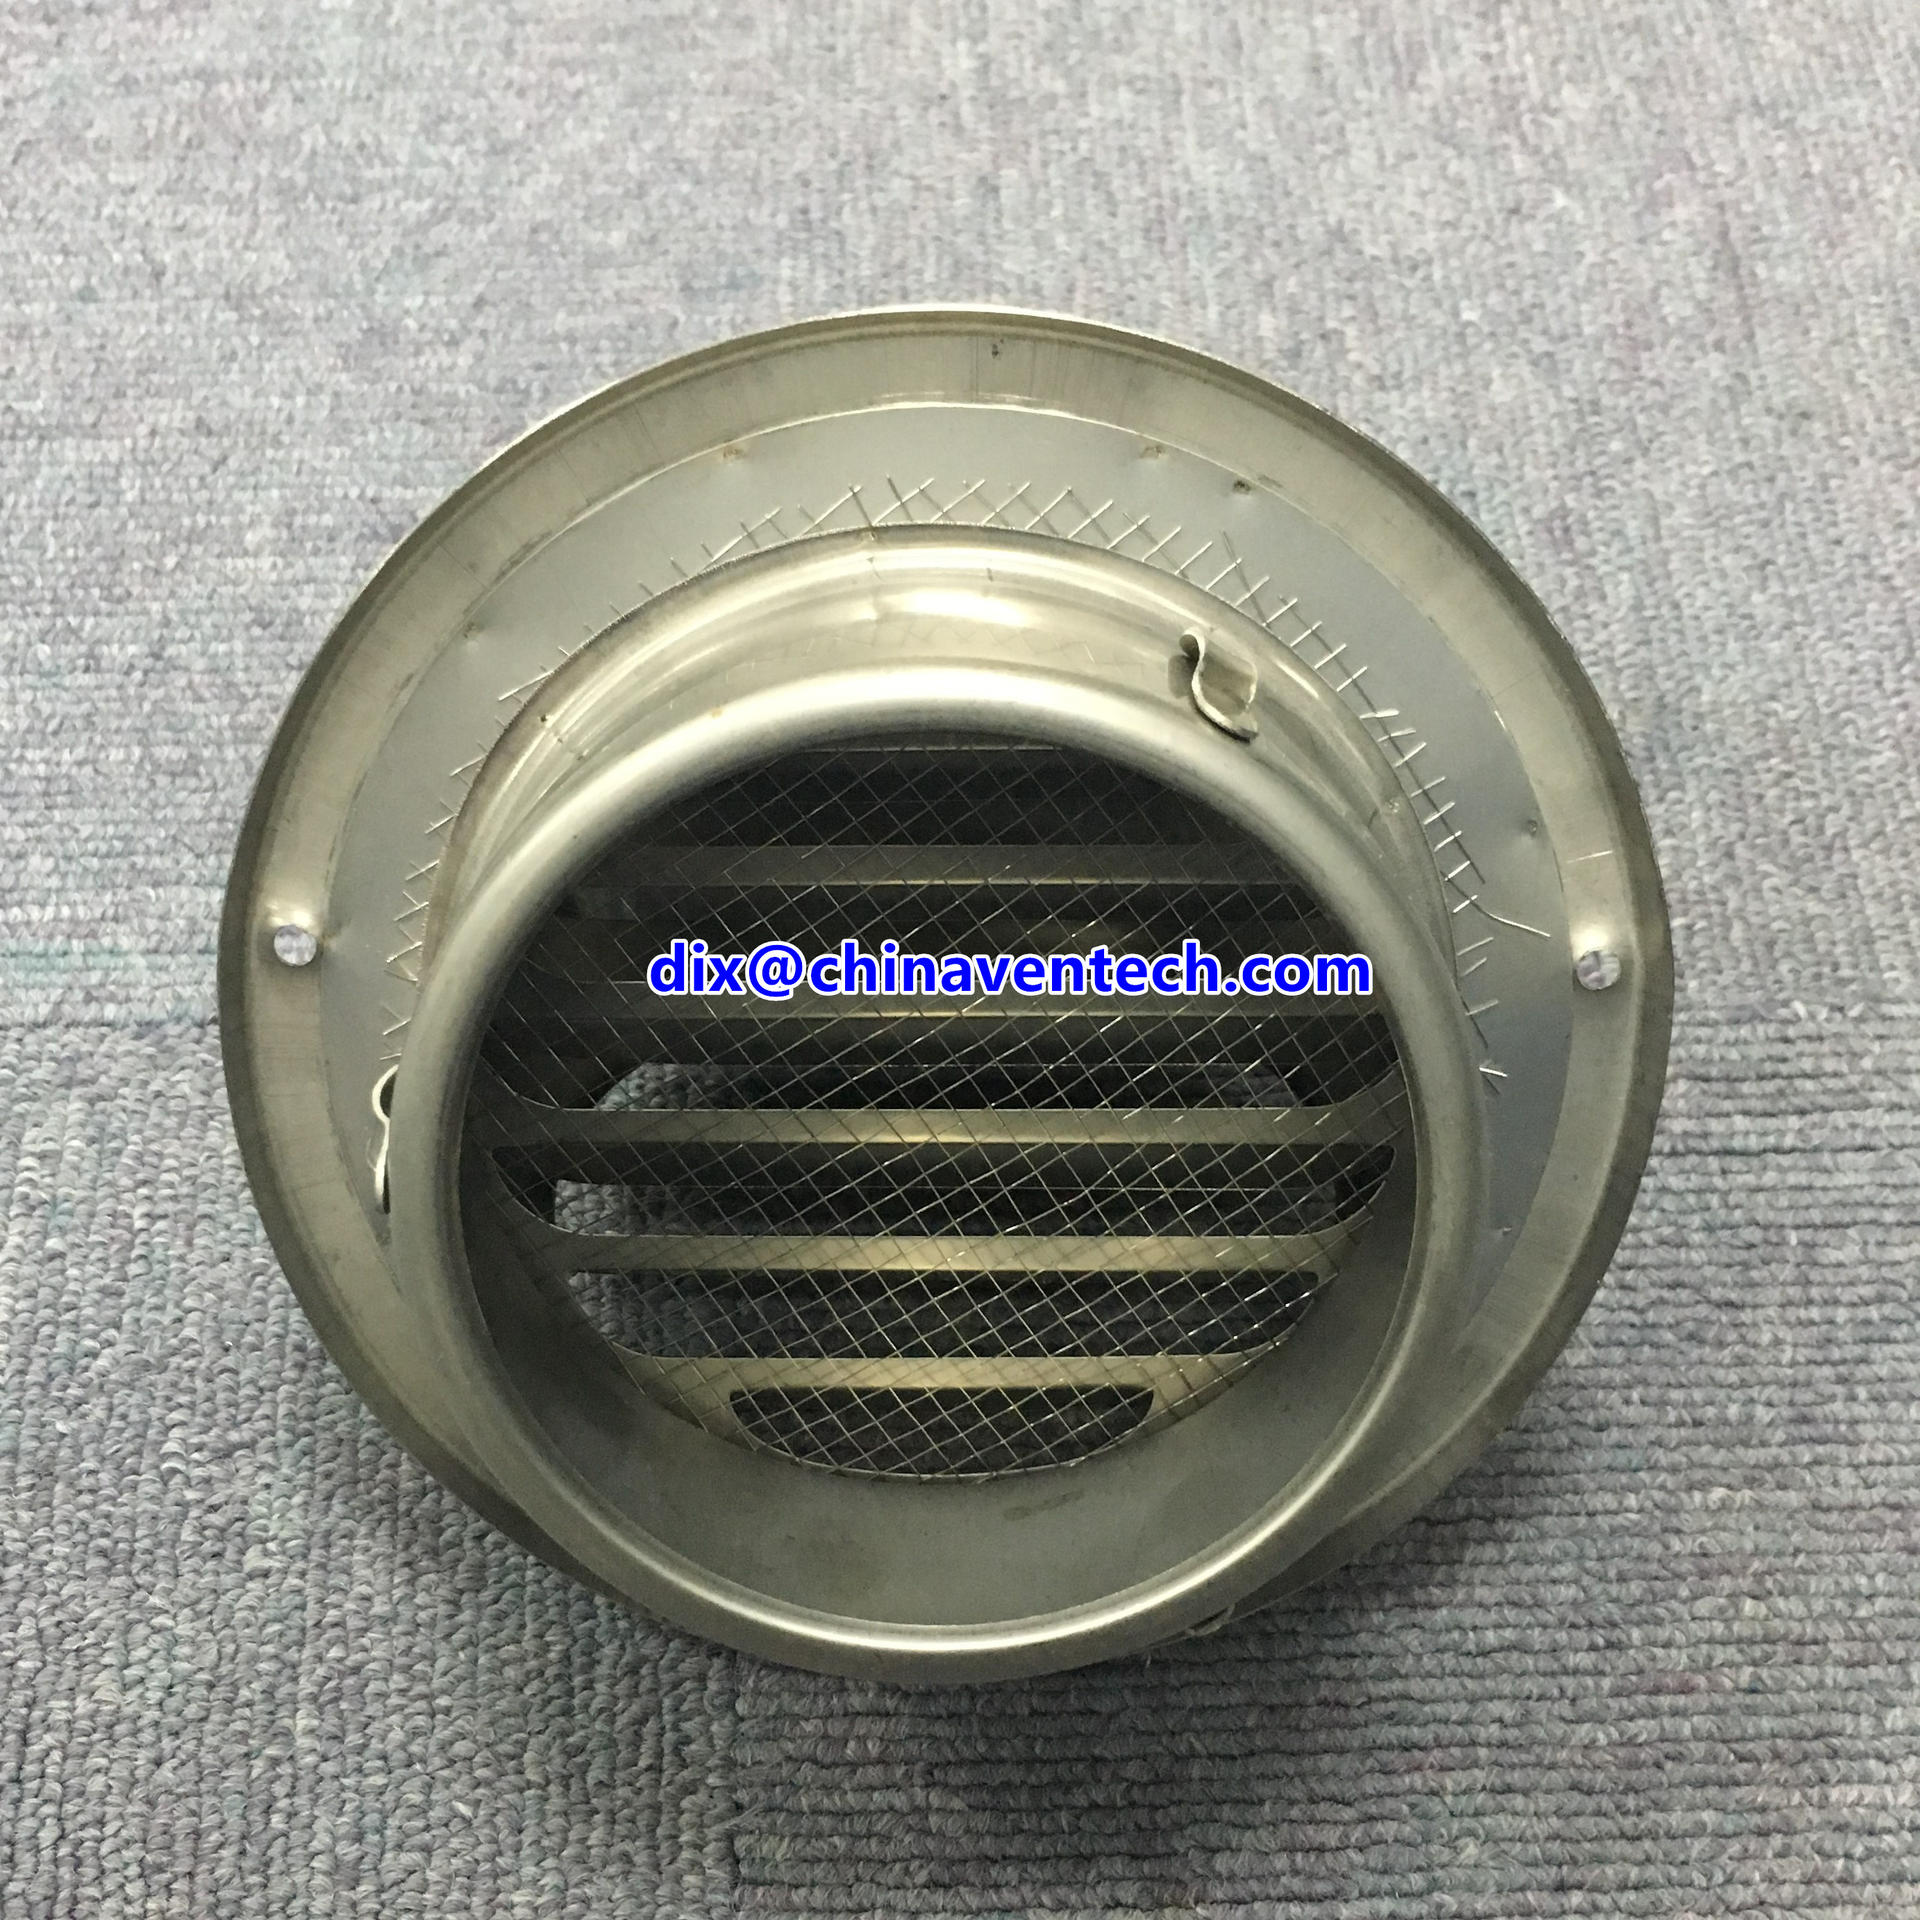 HVAC system 201 stainless steel fresh air vent cover round ball shaped weather louver with insect screen